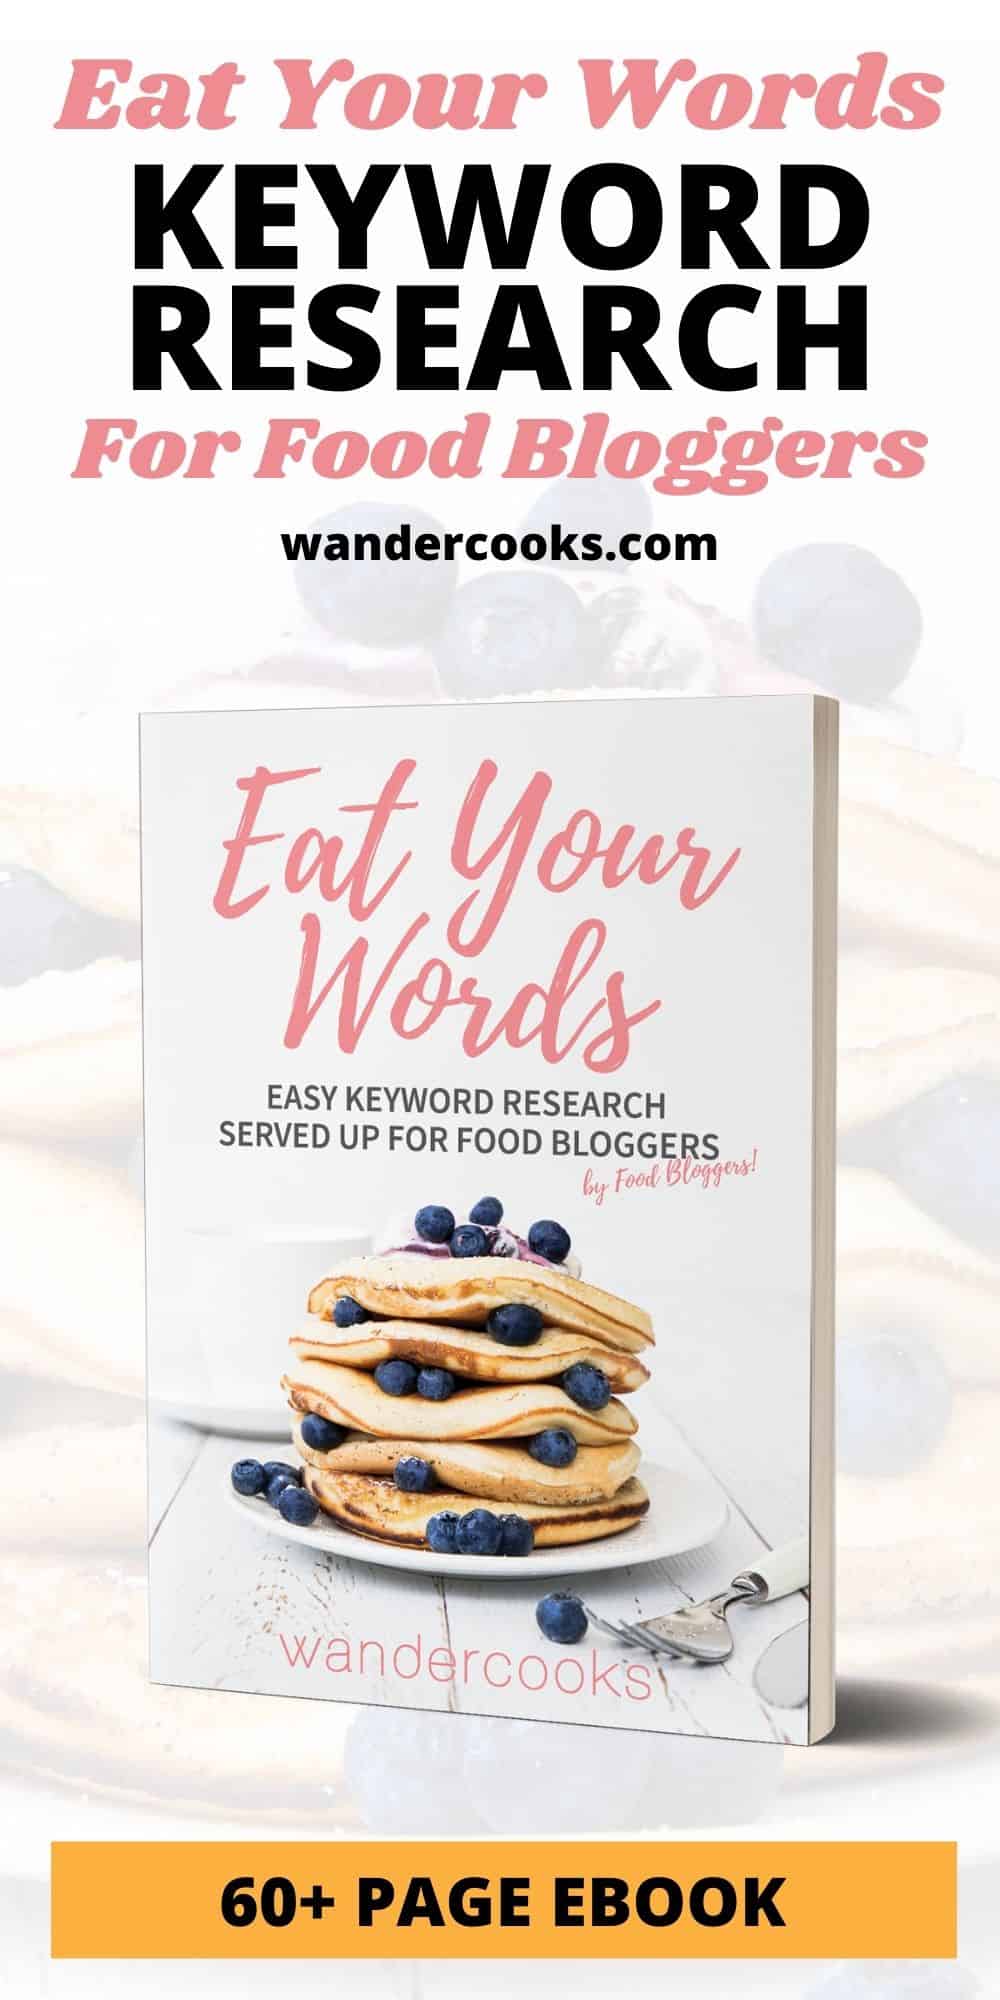 Eat Your Words - Easy Keyword Research for Food Bloggers